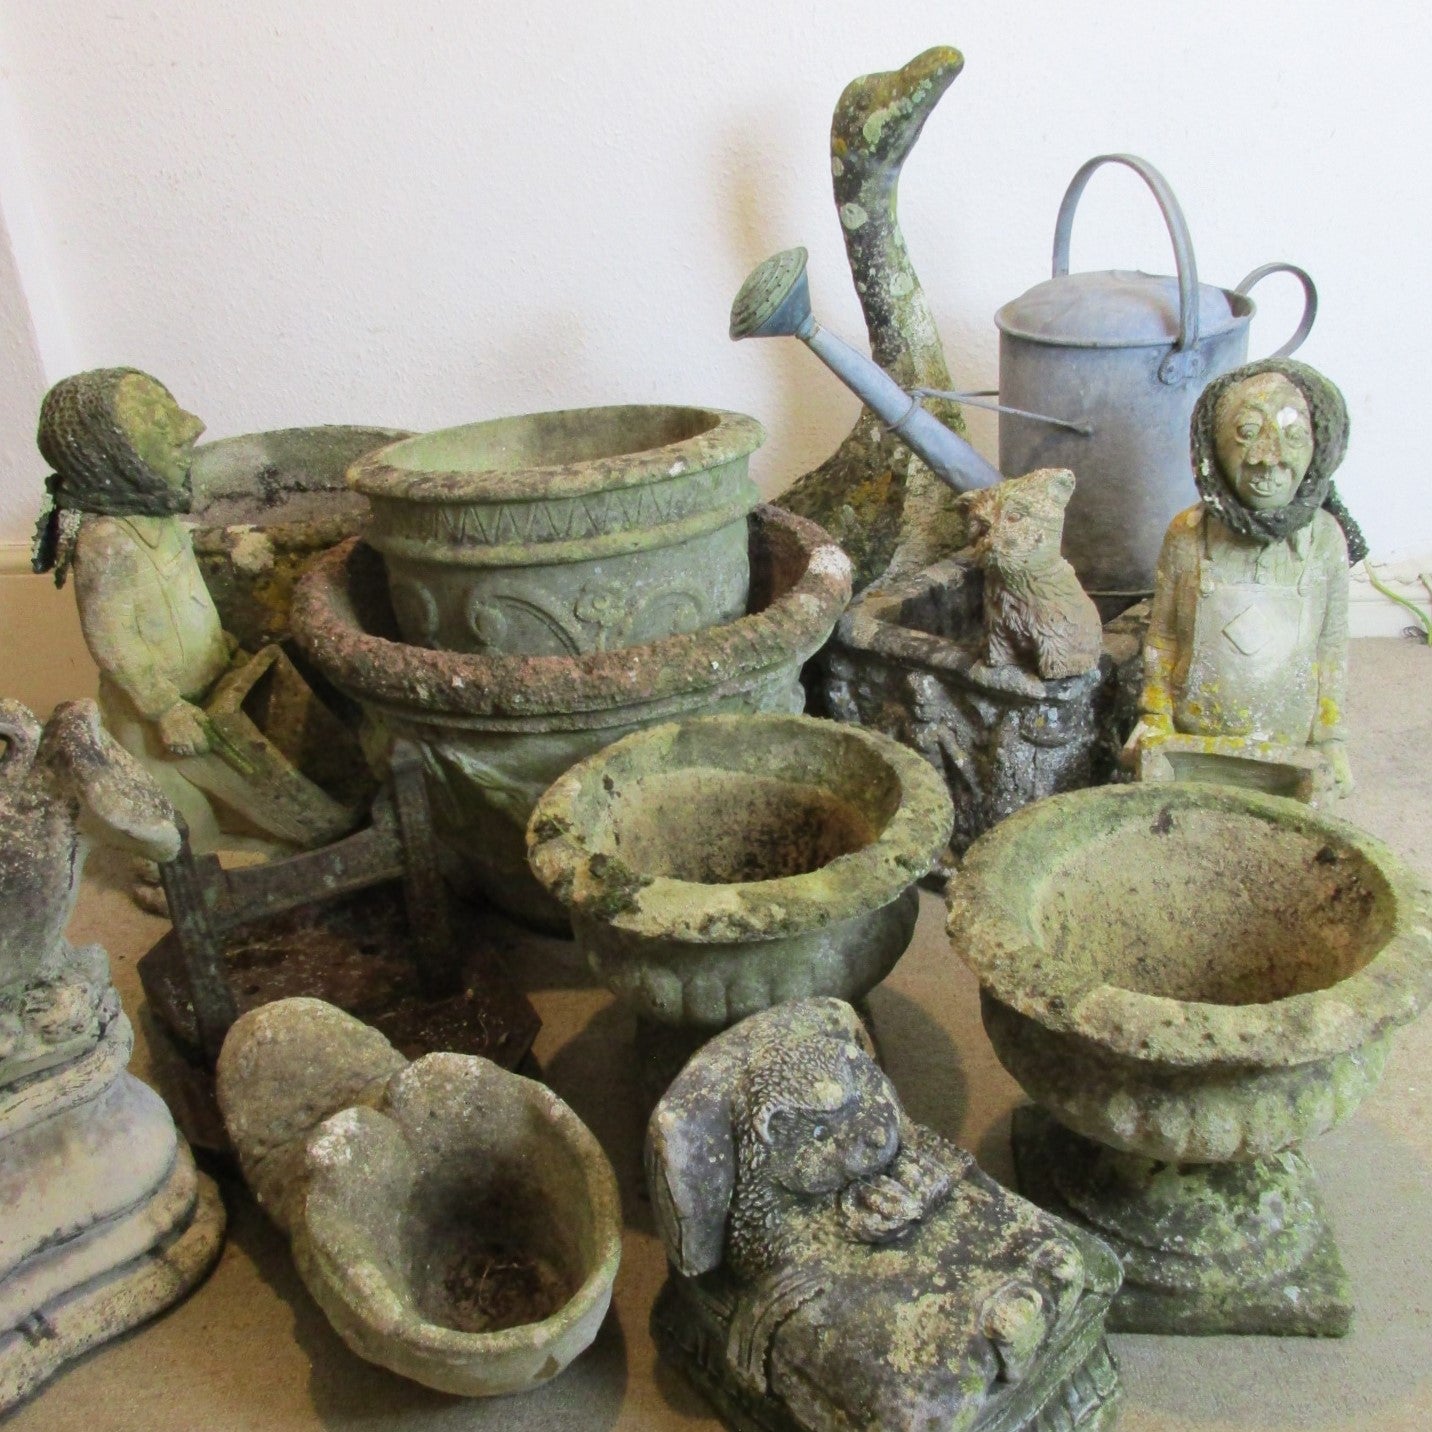 Spring into buying antique and vintage garden stuff click & collect